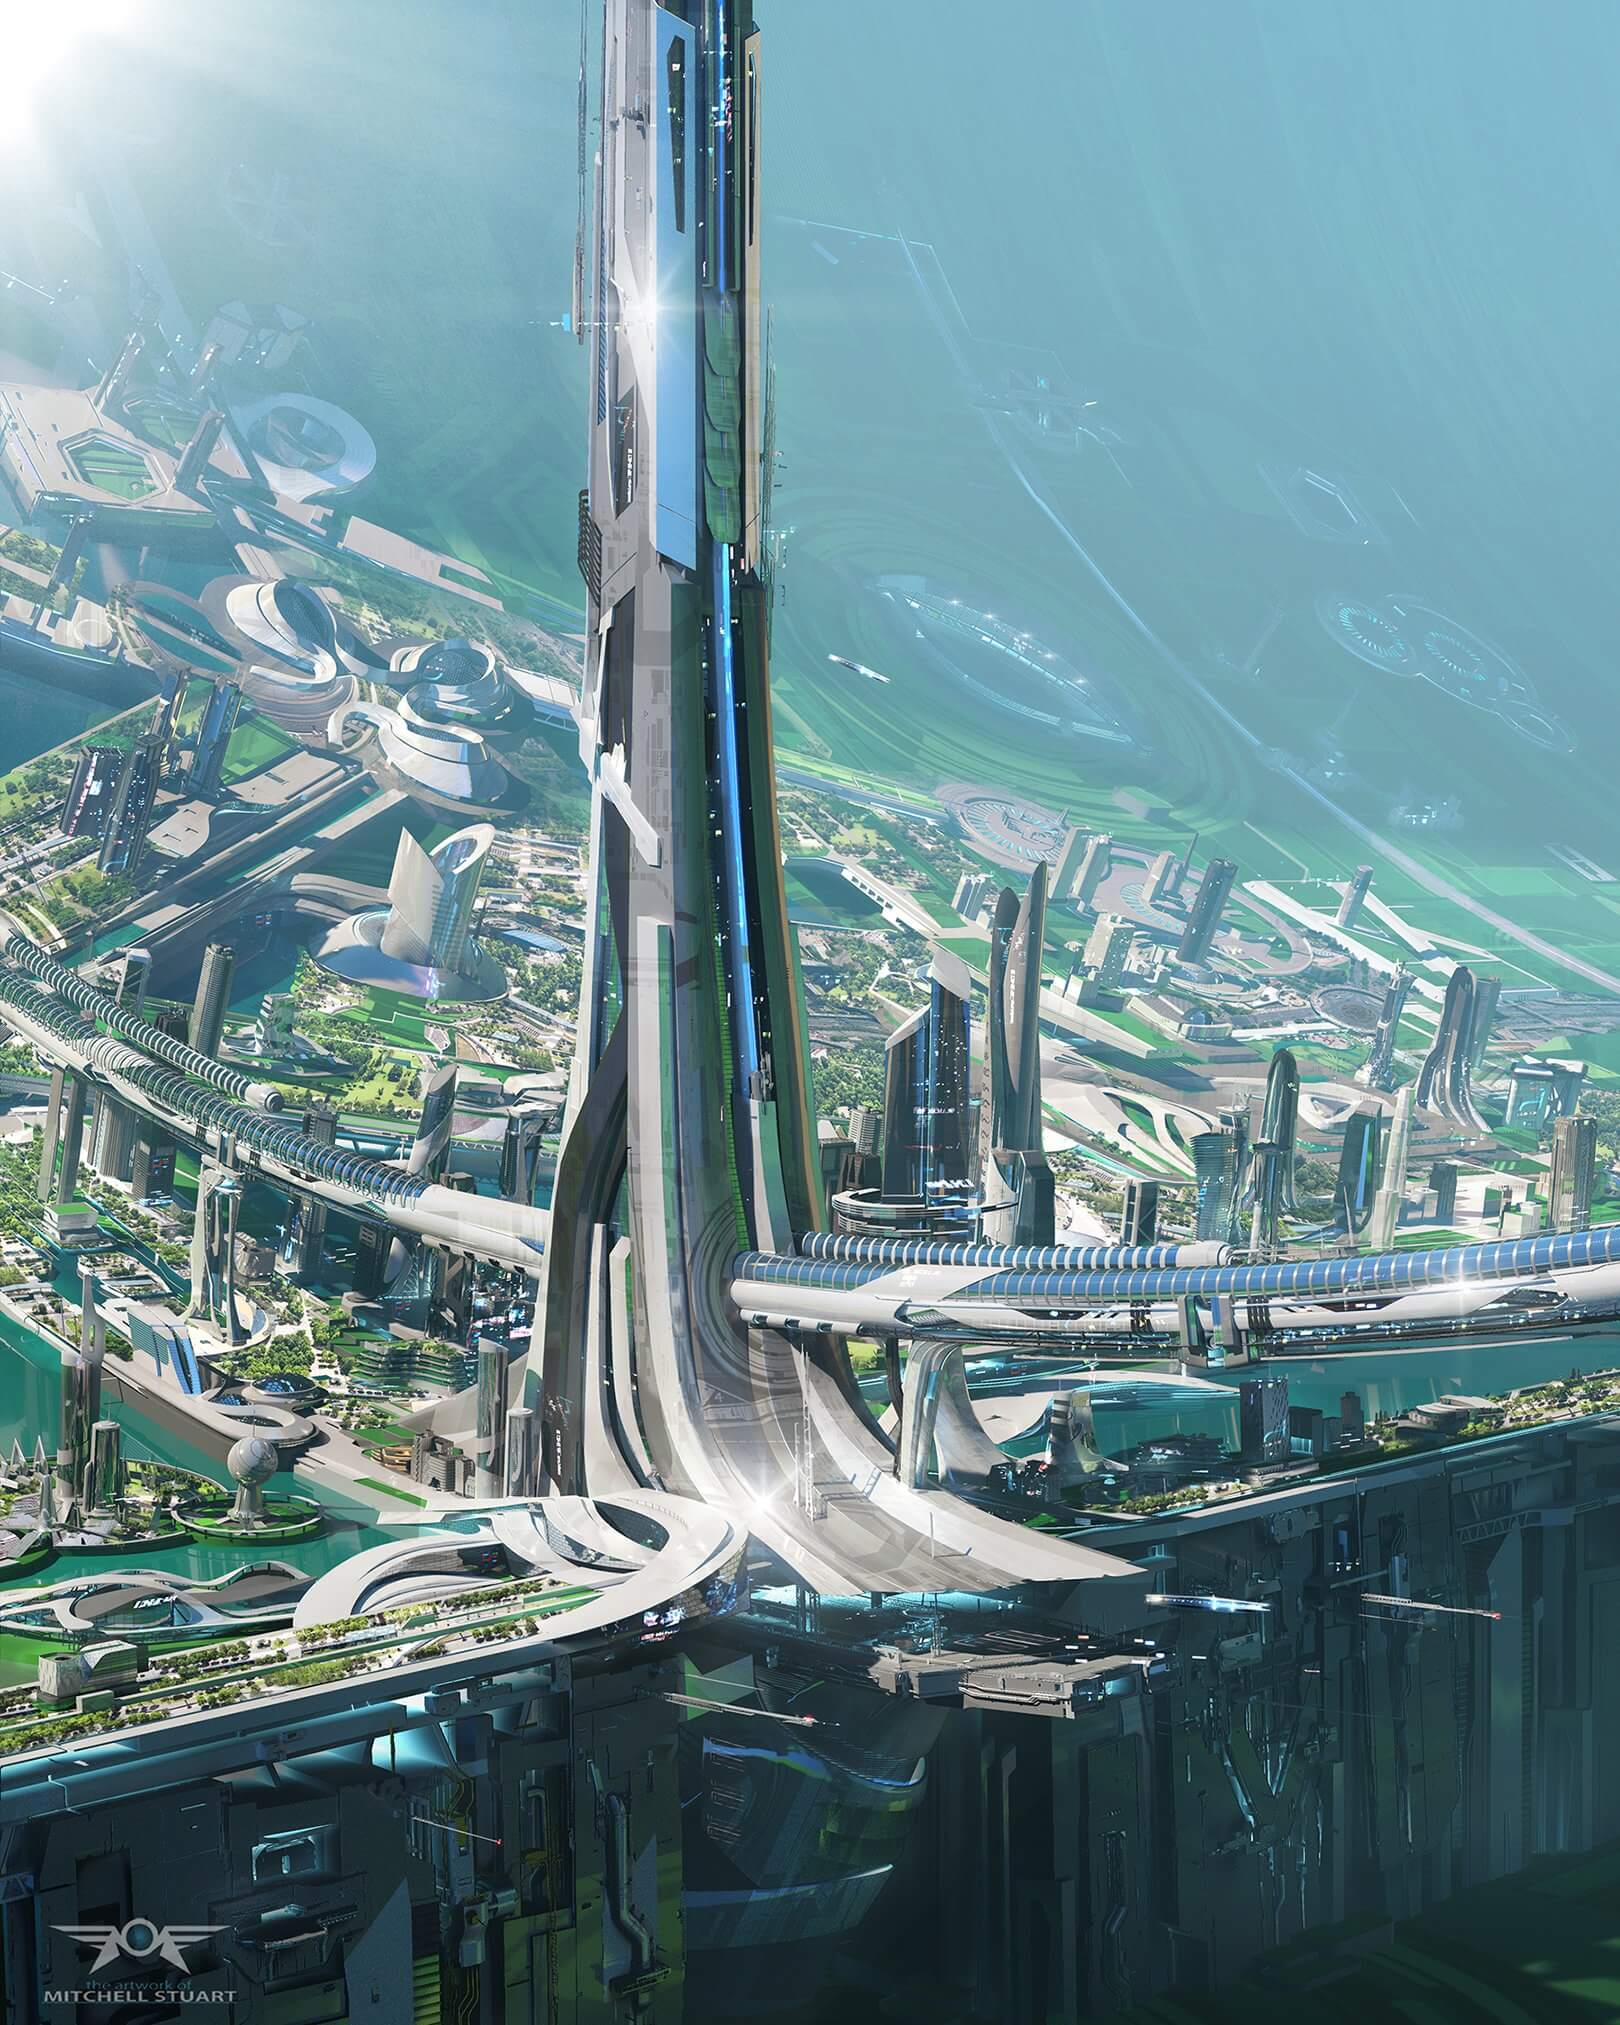 Revisiting the Ringworld